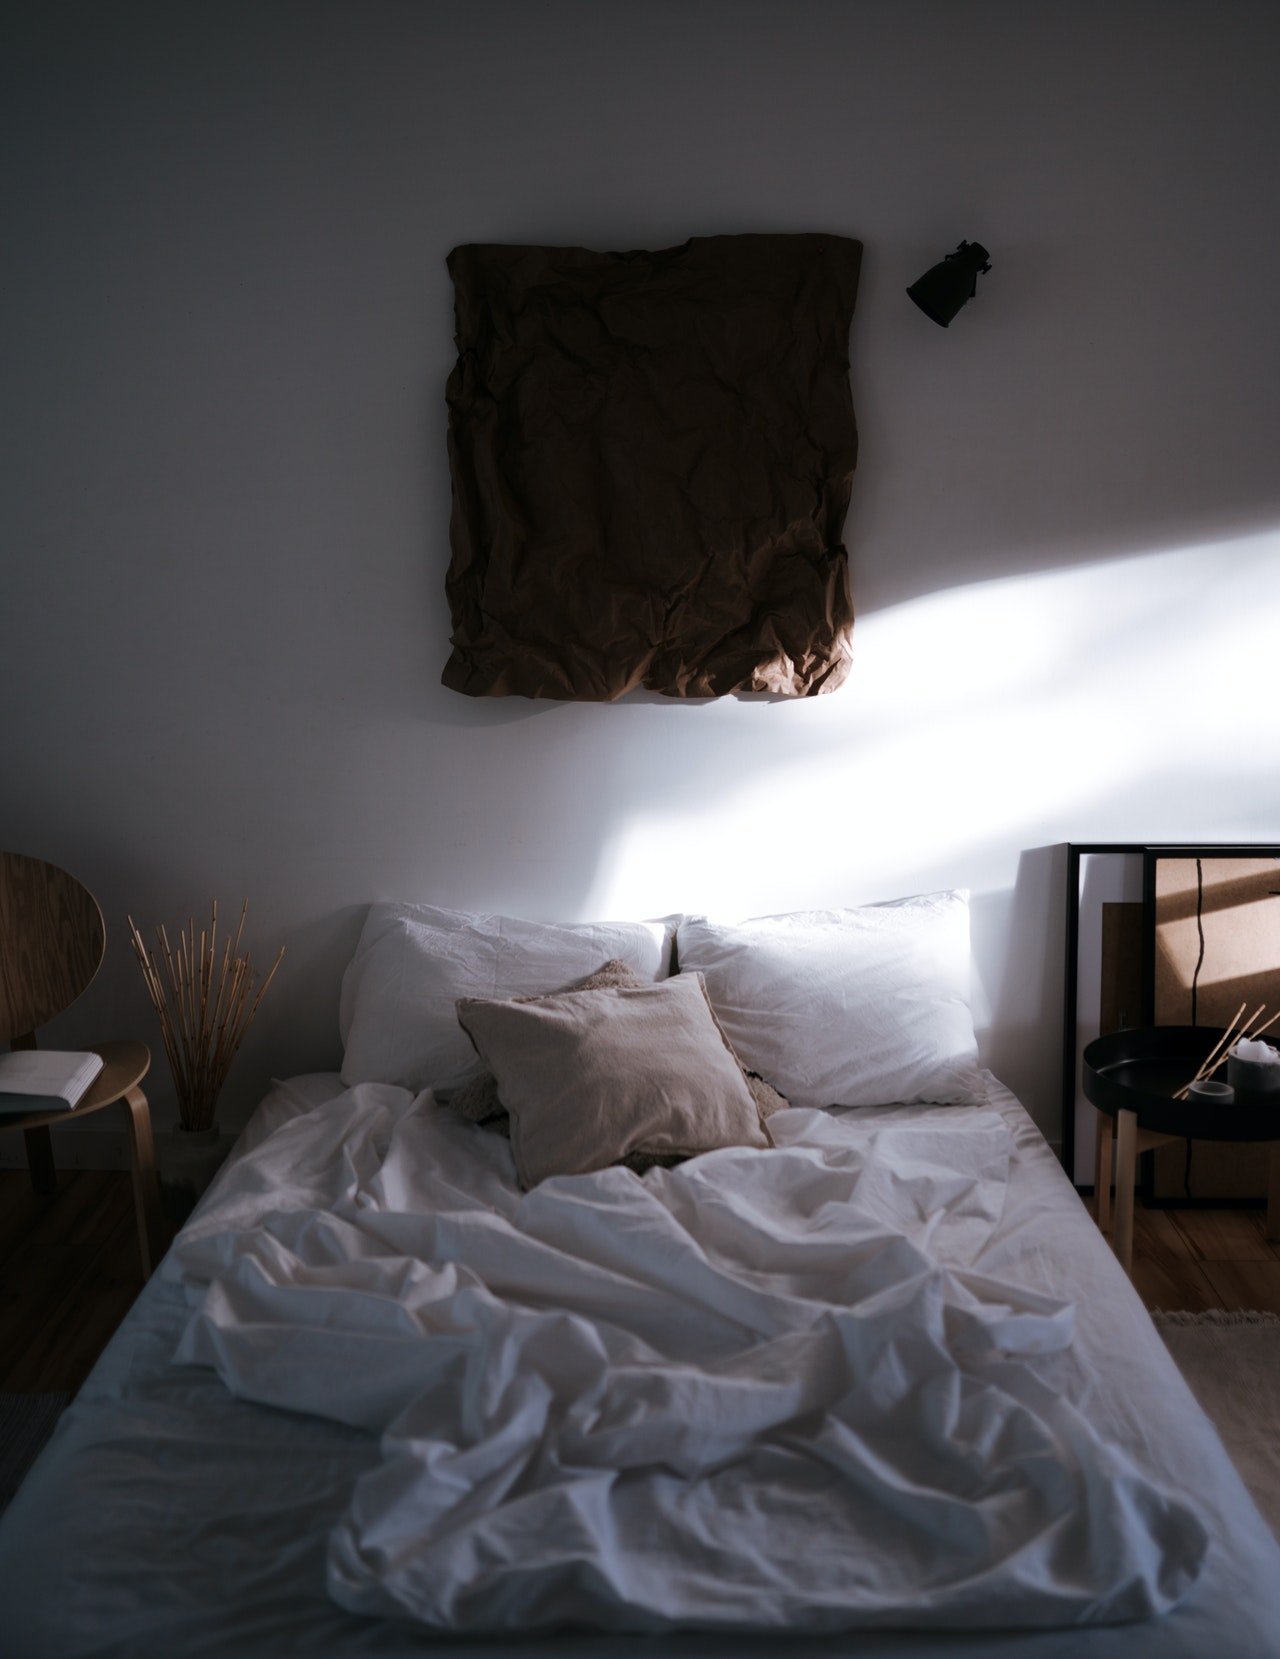 Walking into Kyle's room was the hardest part. | Source: Pexels